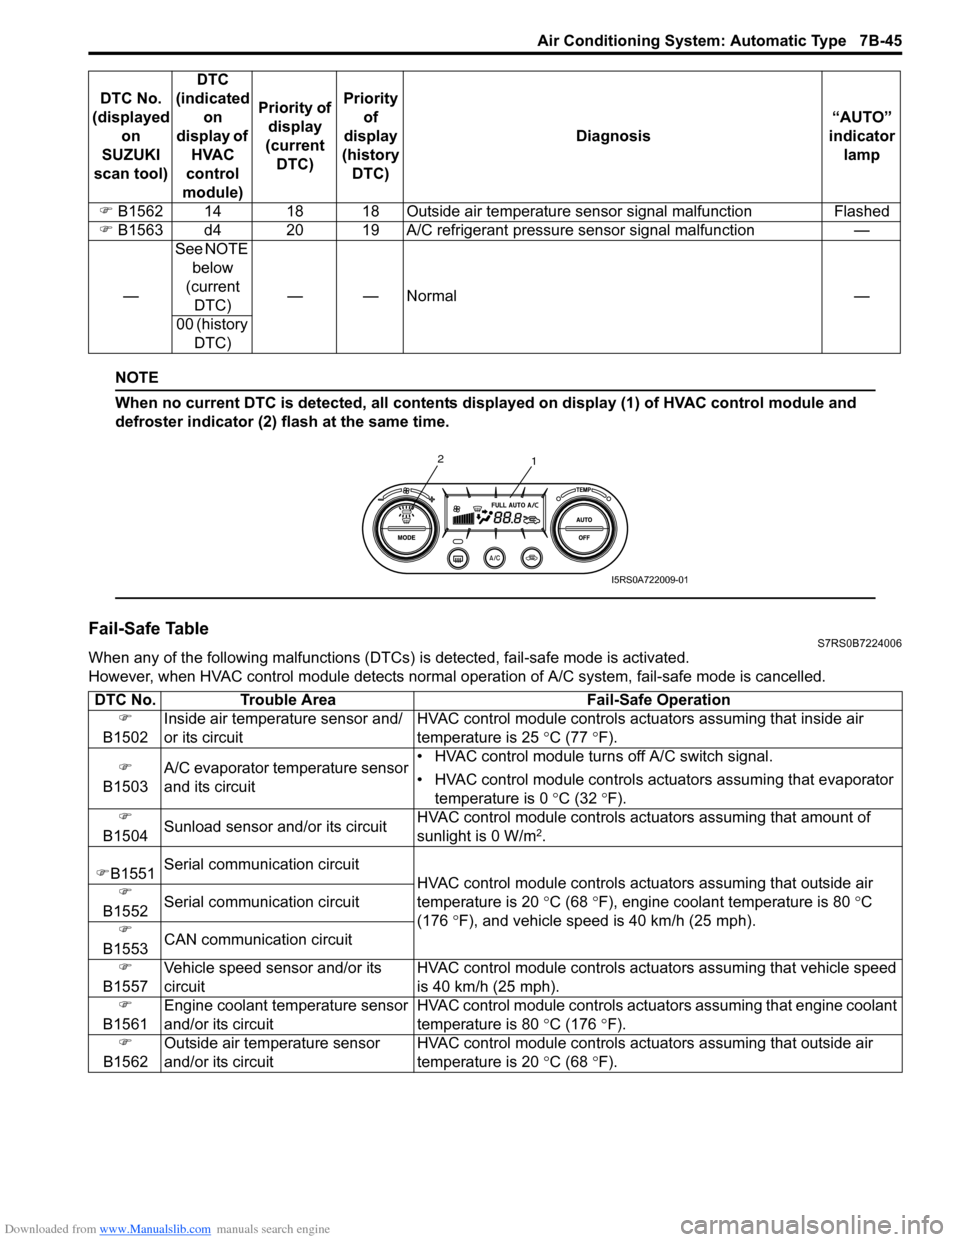 SUZUKI SWIFT 2007 2.G Service Workshop Manual Downloaded from www.Manualslib.com manuals search engine Air Conditioning System: Automatic Type 7B-45
NOTE
When no current DTC is detected, all contents displayed on display (1) of HVAC control modul